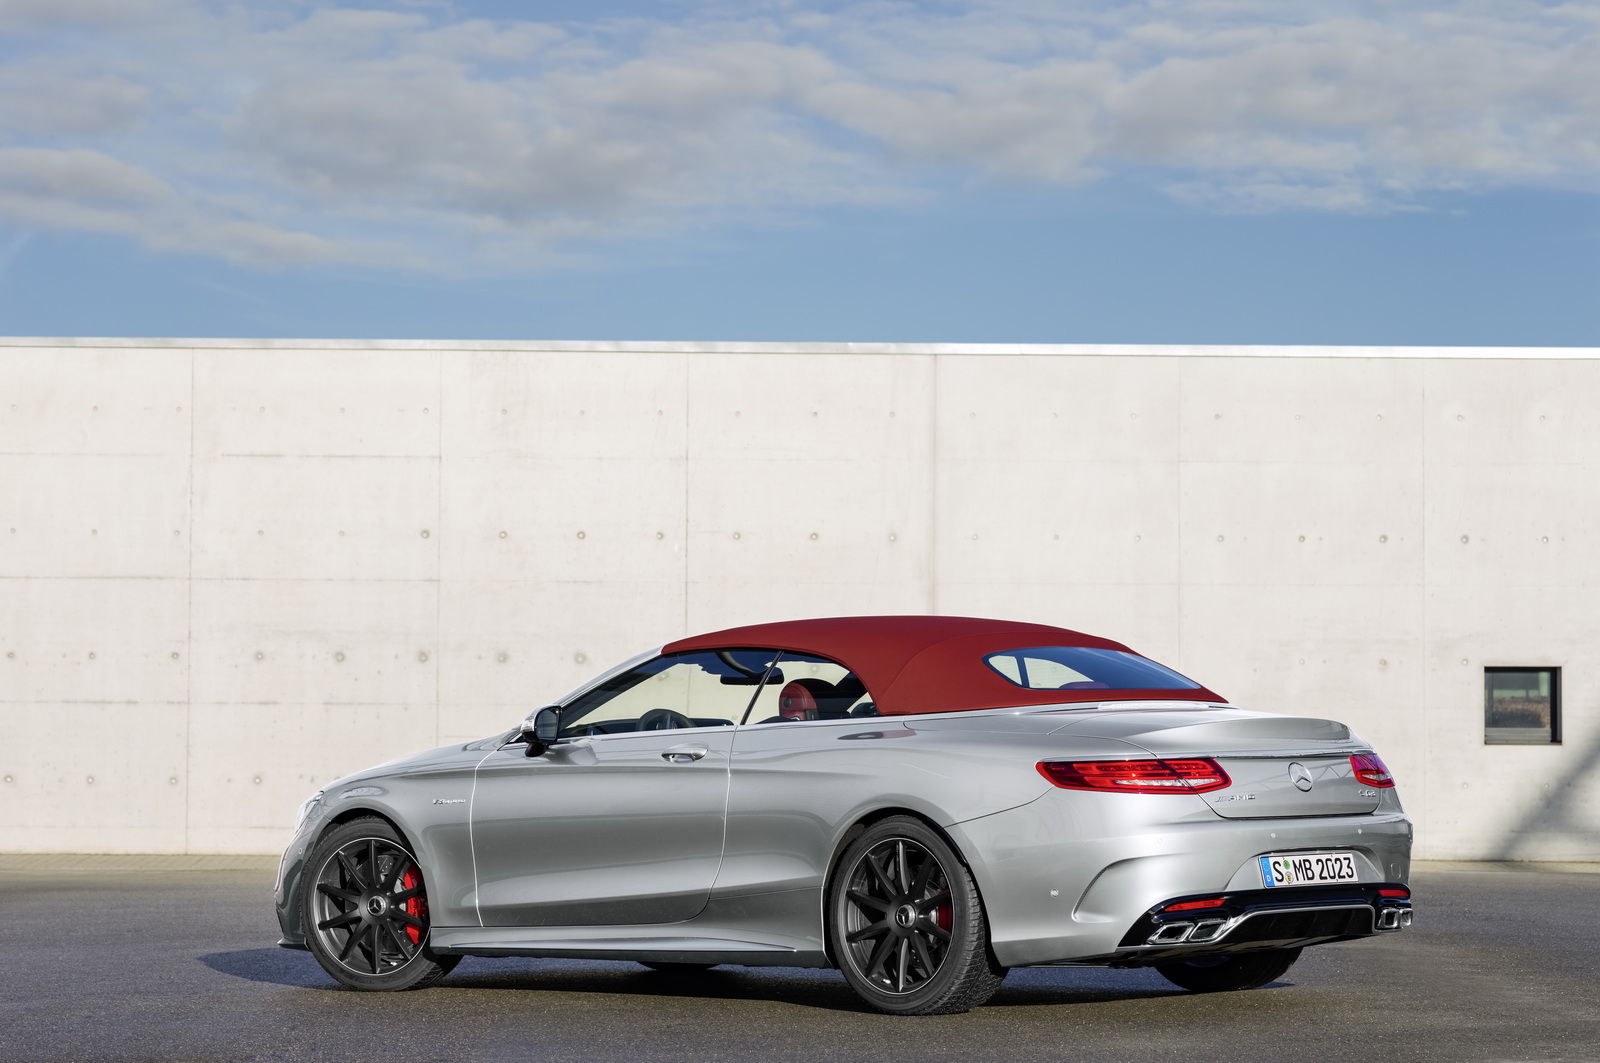 Mercedes-AMG S 63 4MATIC Cabriolet "Edition 130" (Fuel consumption combined: 10.4 l /100 km; combined CO2 emissions: 244 g/km; Kraftstoffverbrauch kombiniert: 10,4 l/100 km; CO2-Emissionen kombiniert: 244 g/km)Exterieur: AMG Alubeam silberexterior: AMG alubeam silver Stoffverdeck Rot / fabric soft top red